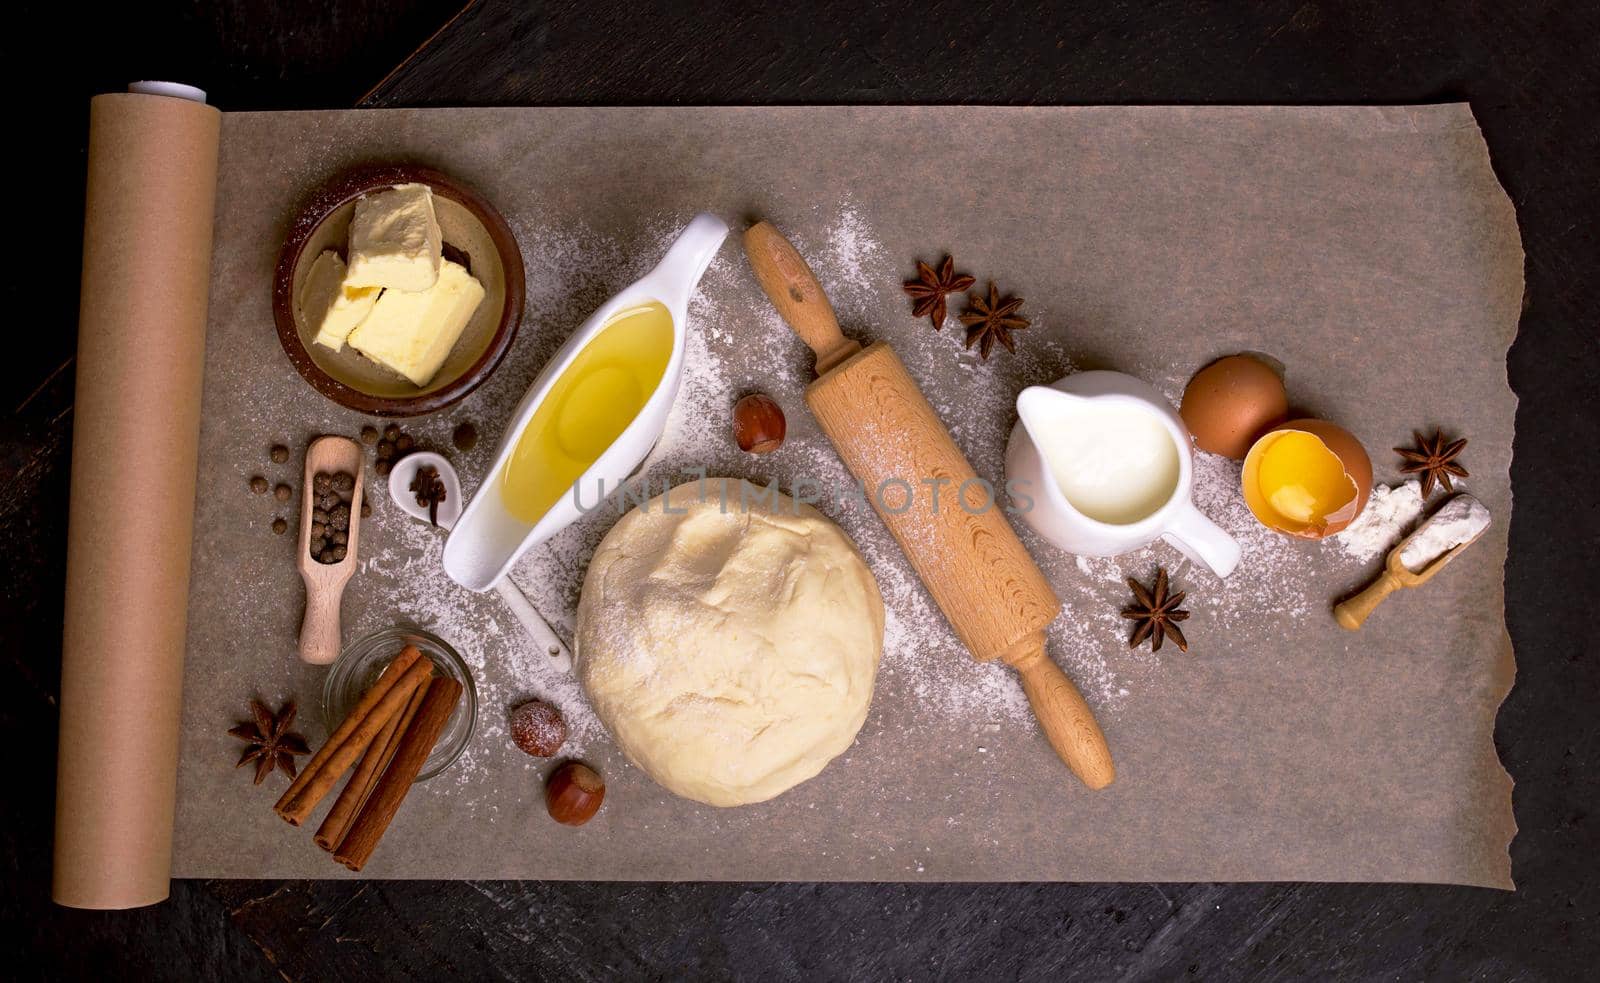 The ingredients for baking cupcake with raisins by aprilphoto